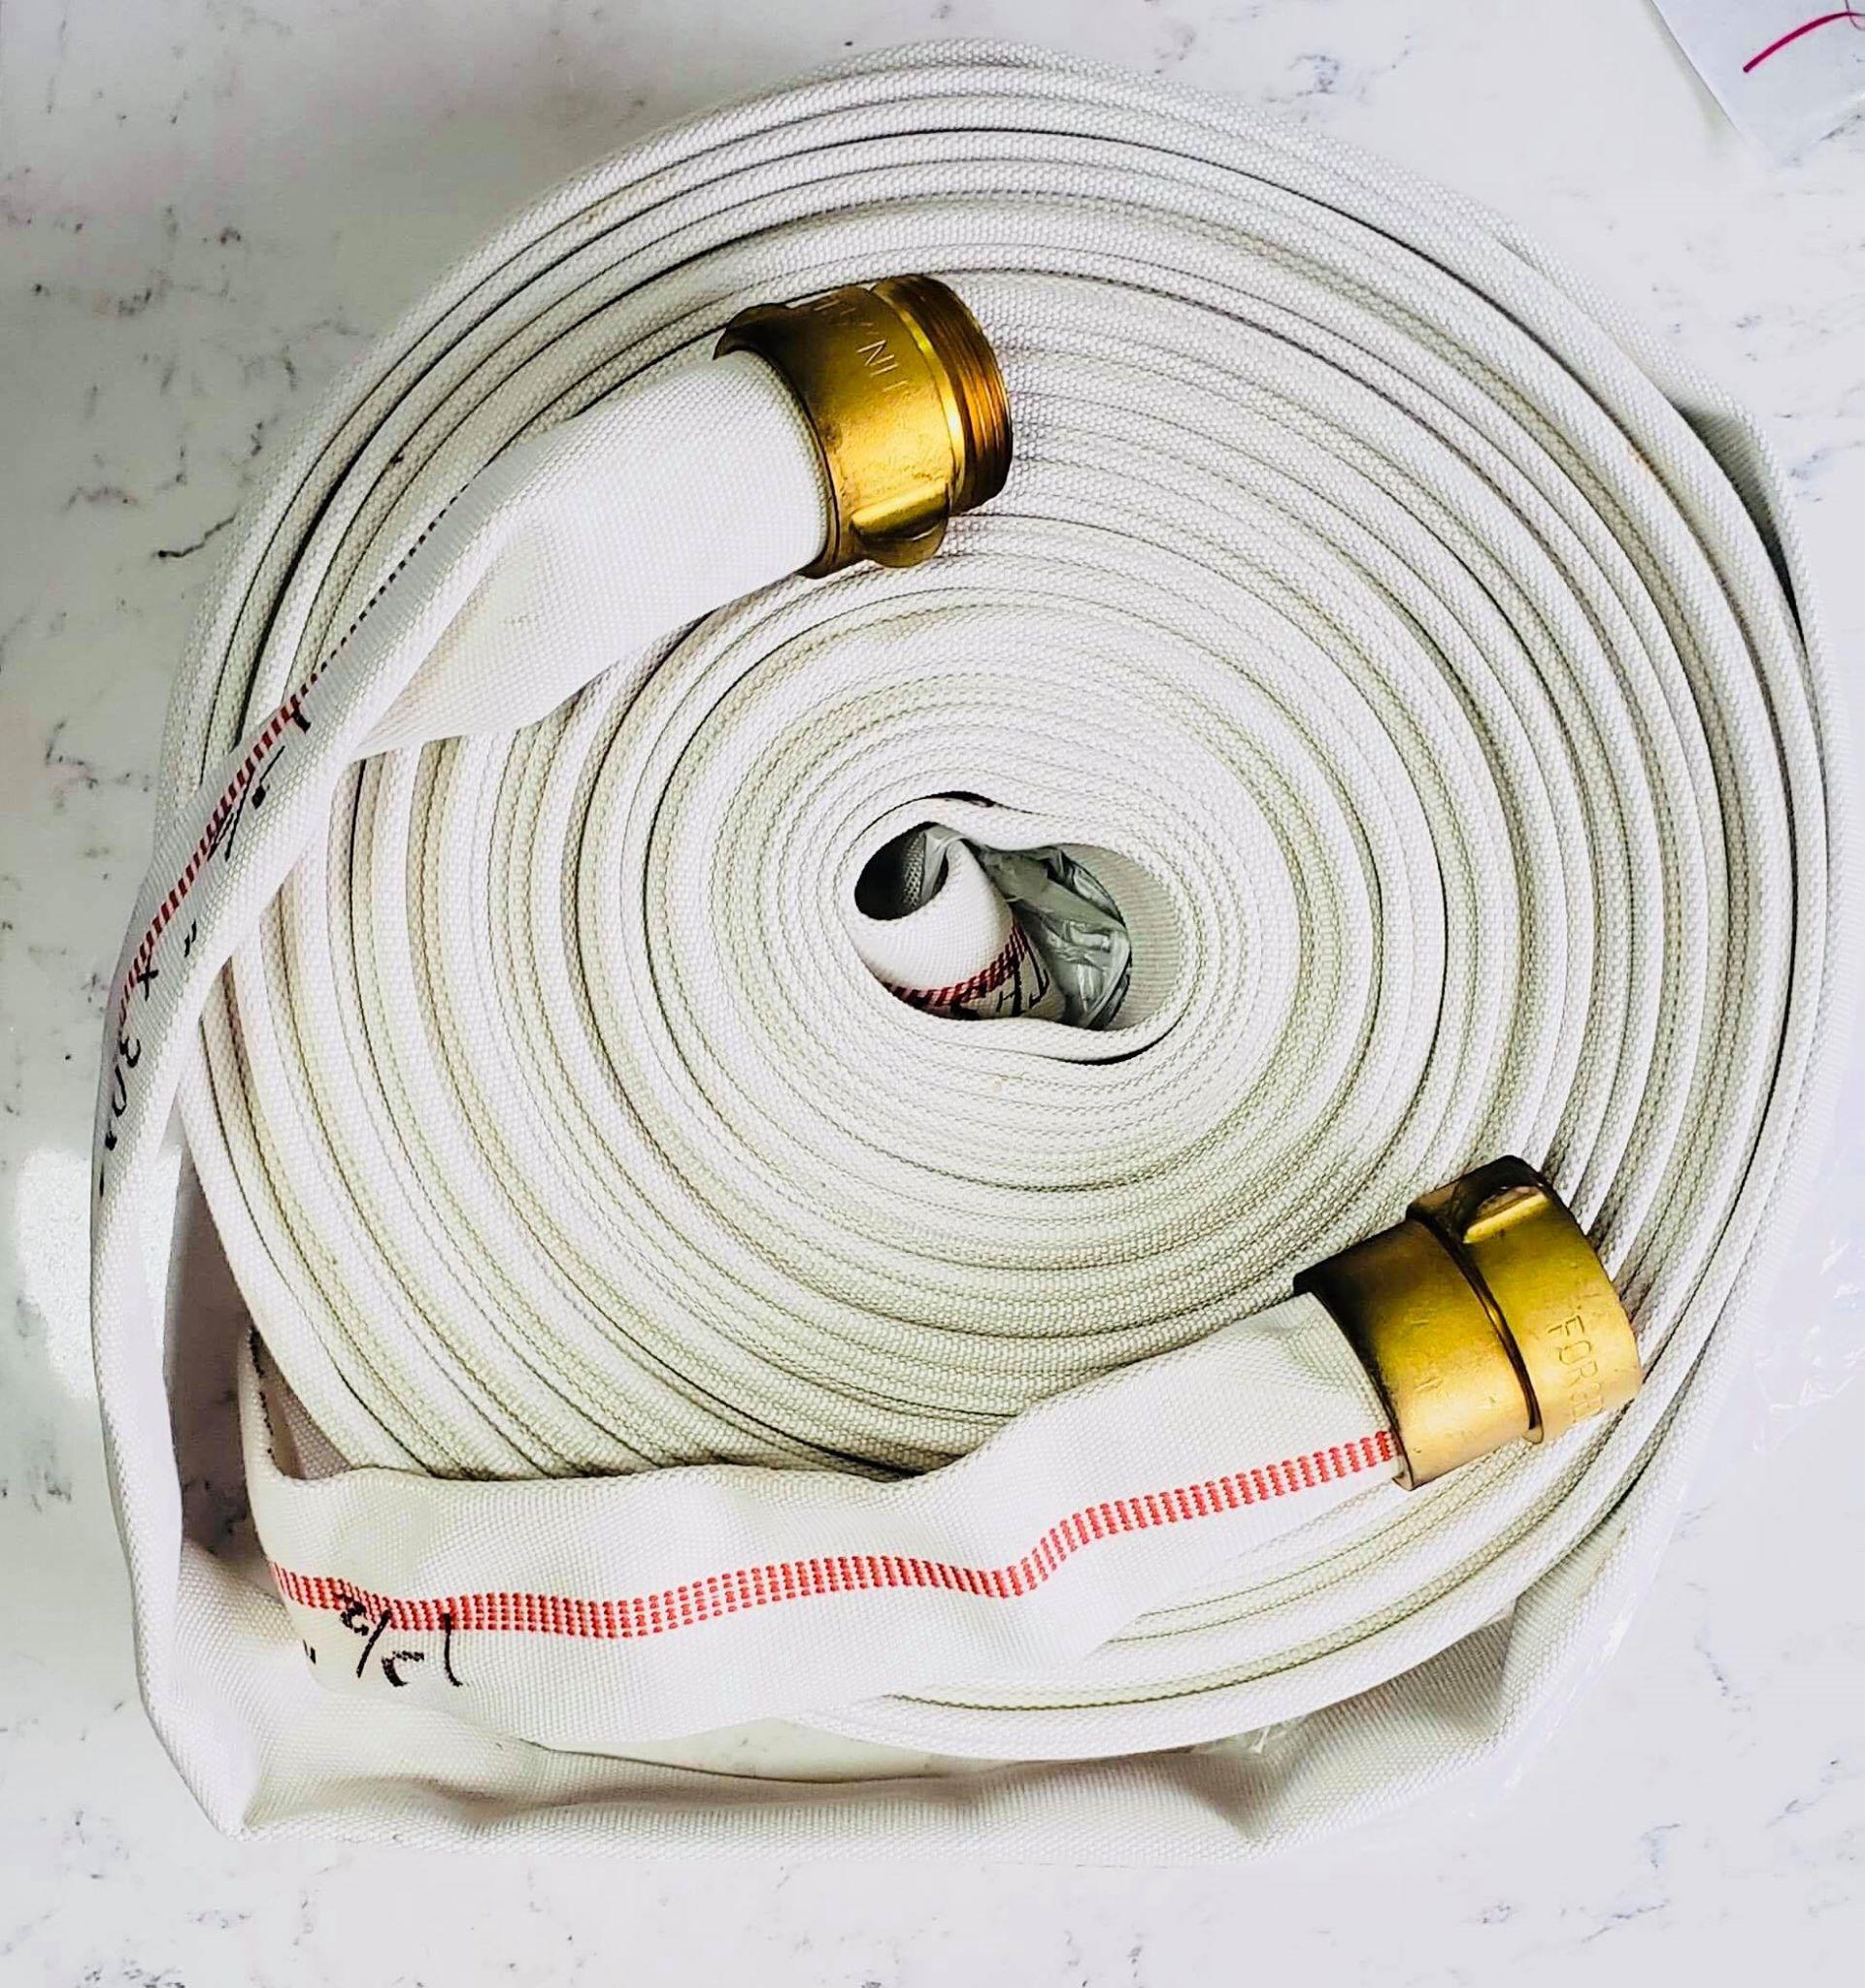 Fire Hose 1 1 2 X 100ft Double Jacket Brass Coupling 1 5 Inch 100 Ft 30 Meters 40 Mm Lazada Ph